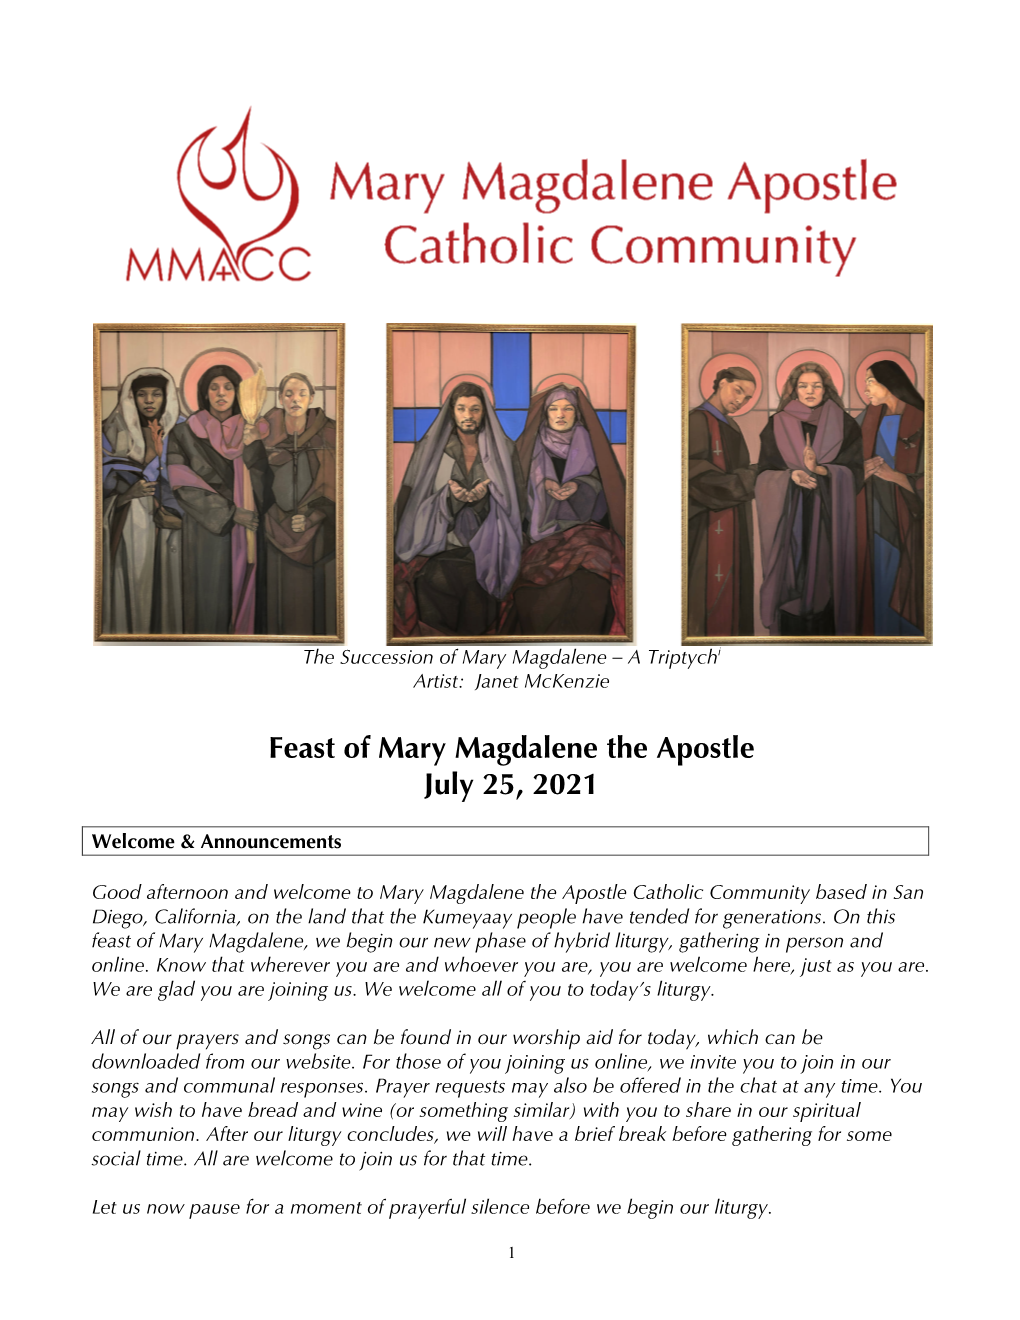 Feast of Mary Magdalene the Apostle July 25, 2021